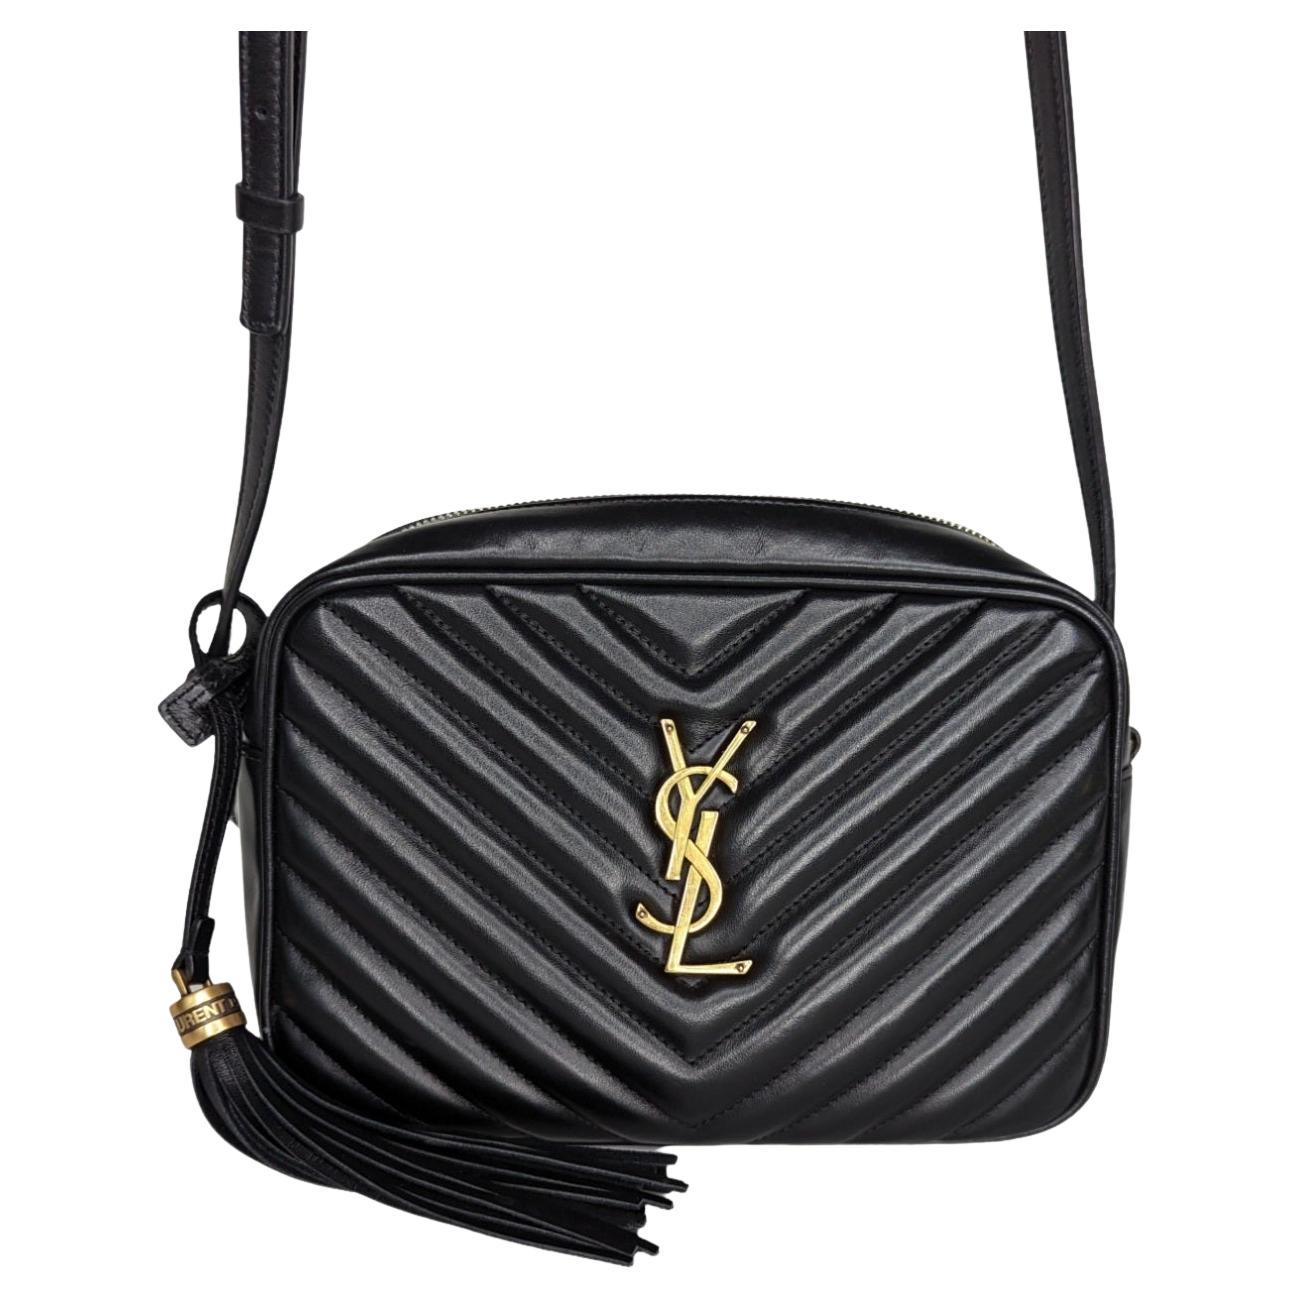 YSL LOU CAMERA BAG ONE YEAR REVIEW, PROS & CONS, OUTFIT INSPO